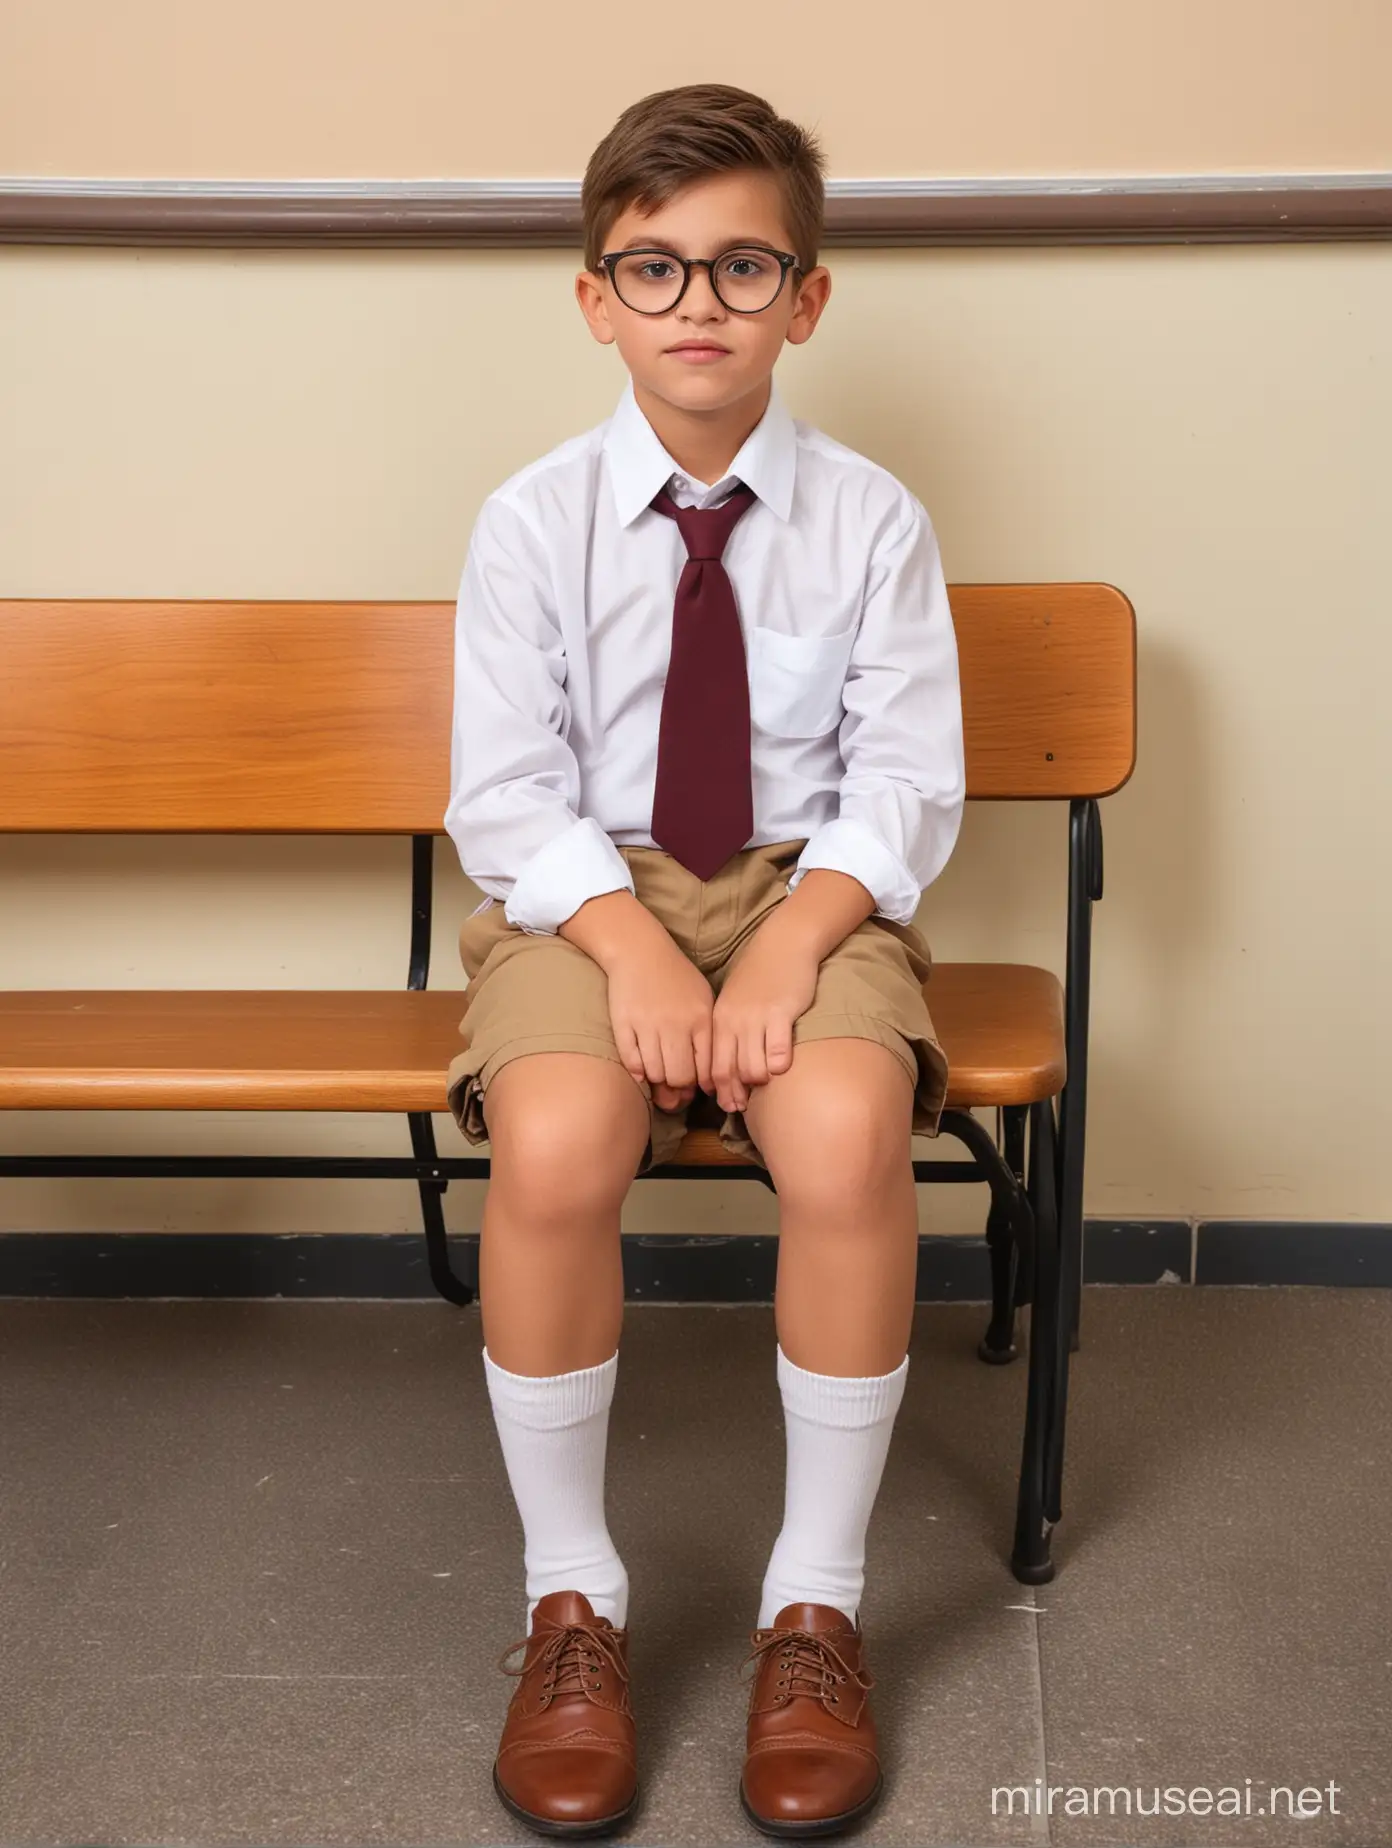 one old fashion child sitting in his seat in the school, he has large socks, brown shorts, glasses and white shirt, he looks at you uncomfortable